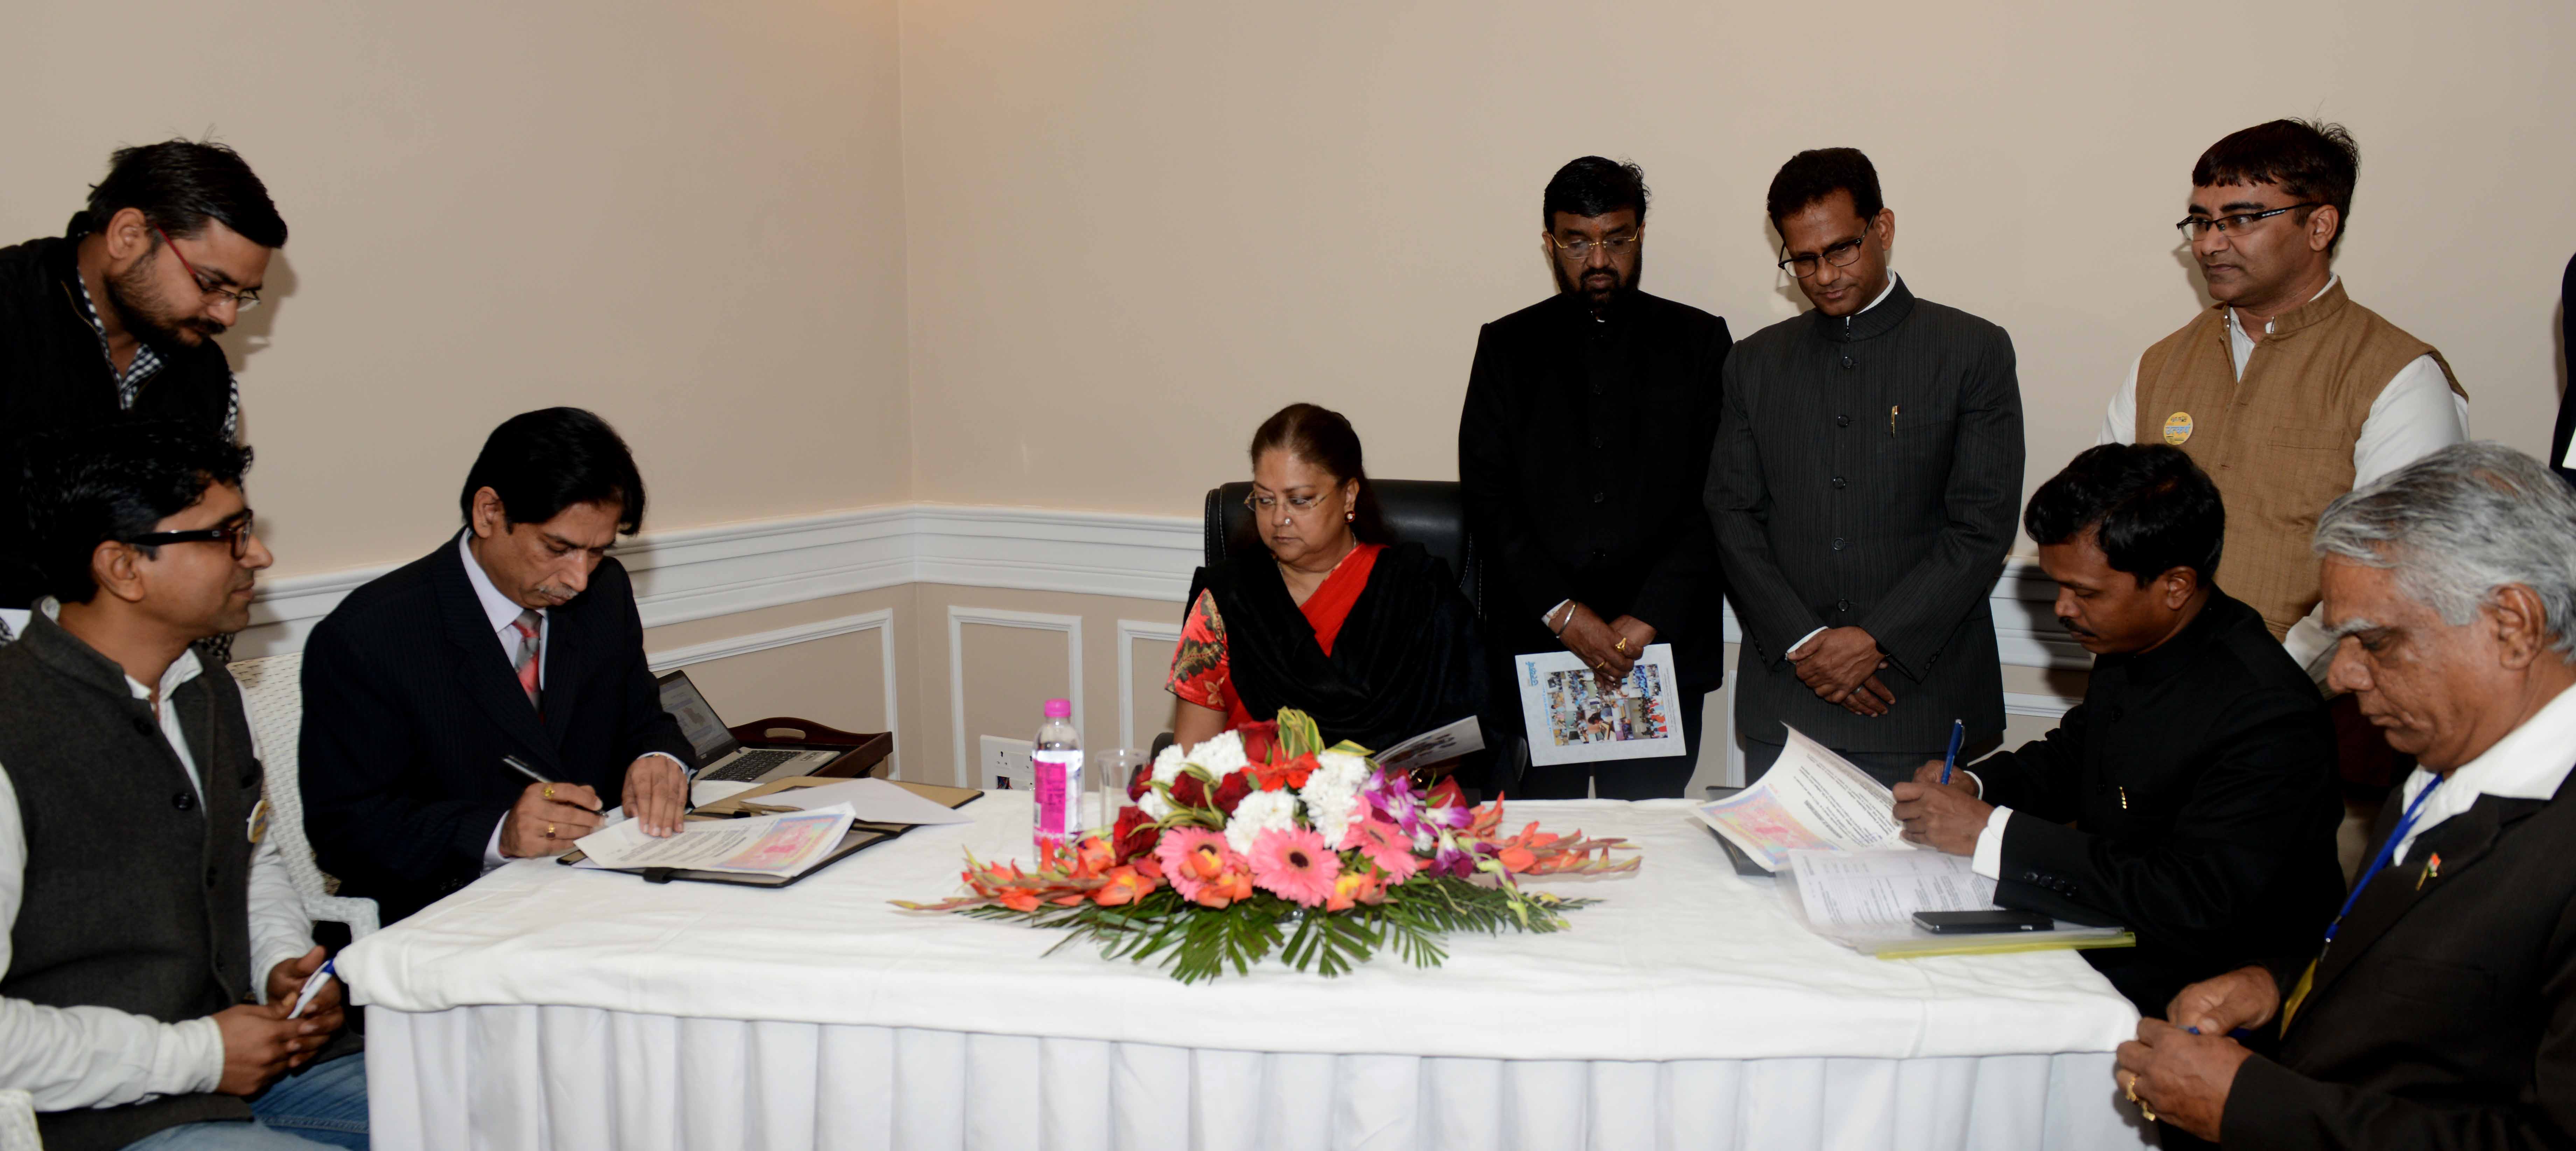 In the presence of Rajasthan CM Vasundhara Raje, district Jodhpur collector Vishnu Charan Malik signed a MoU on behalf of the Rajasthan government with Sunil Kulwal (SBU Head, Ultratech Cement) and Arvind Thanvi (Chief Mentor, Moini Foundation), the representatives of Project Utkarsh for introducing smart classes in Rajasthan government schools. 